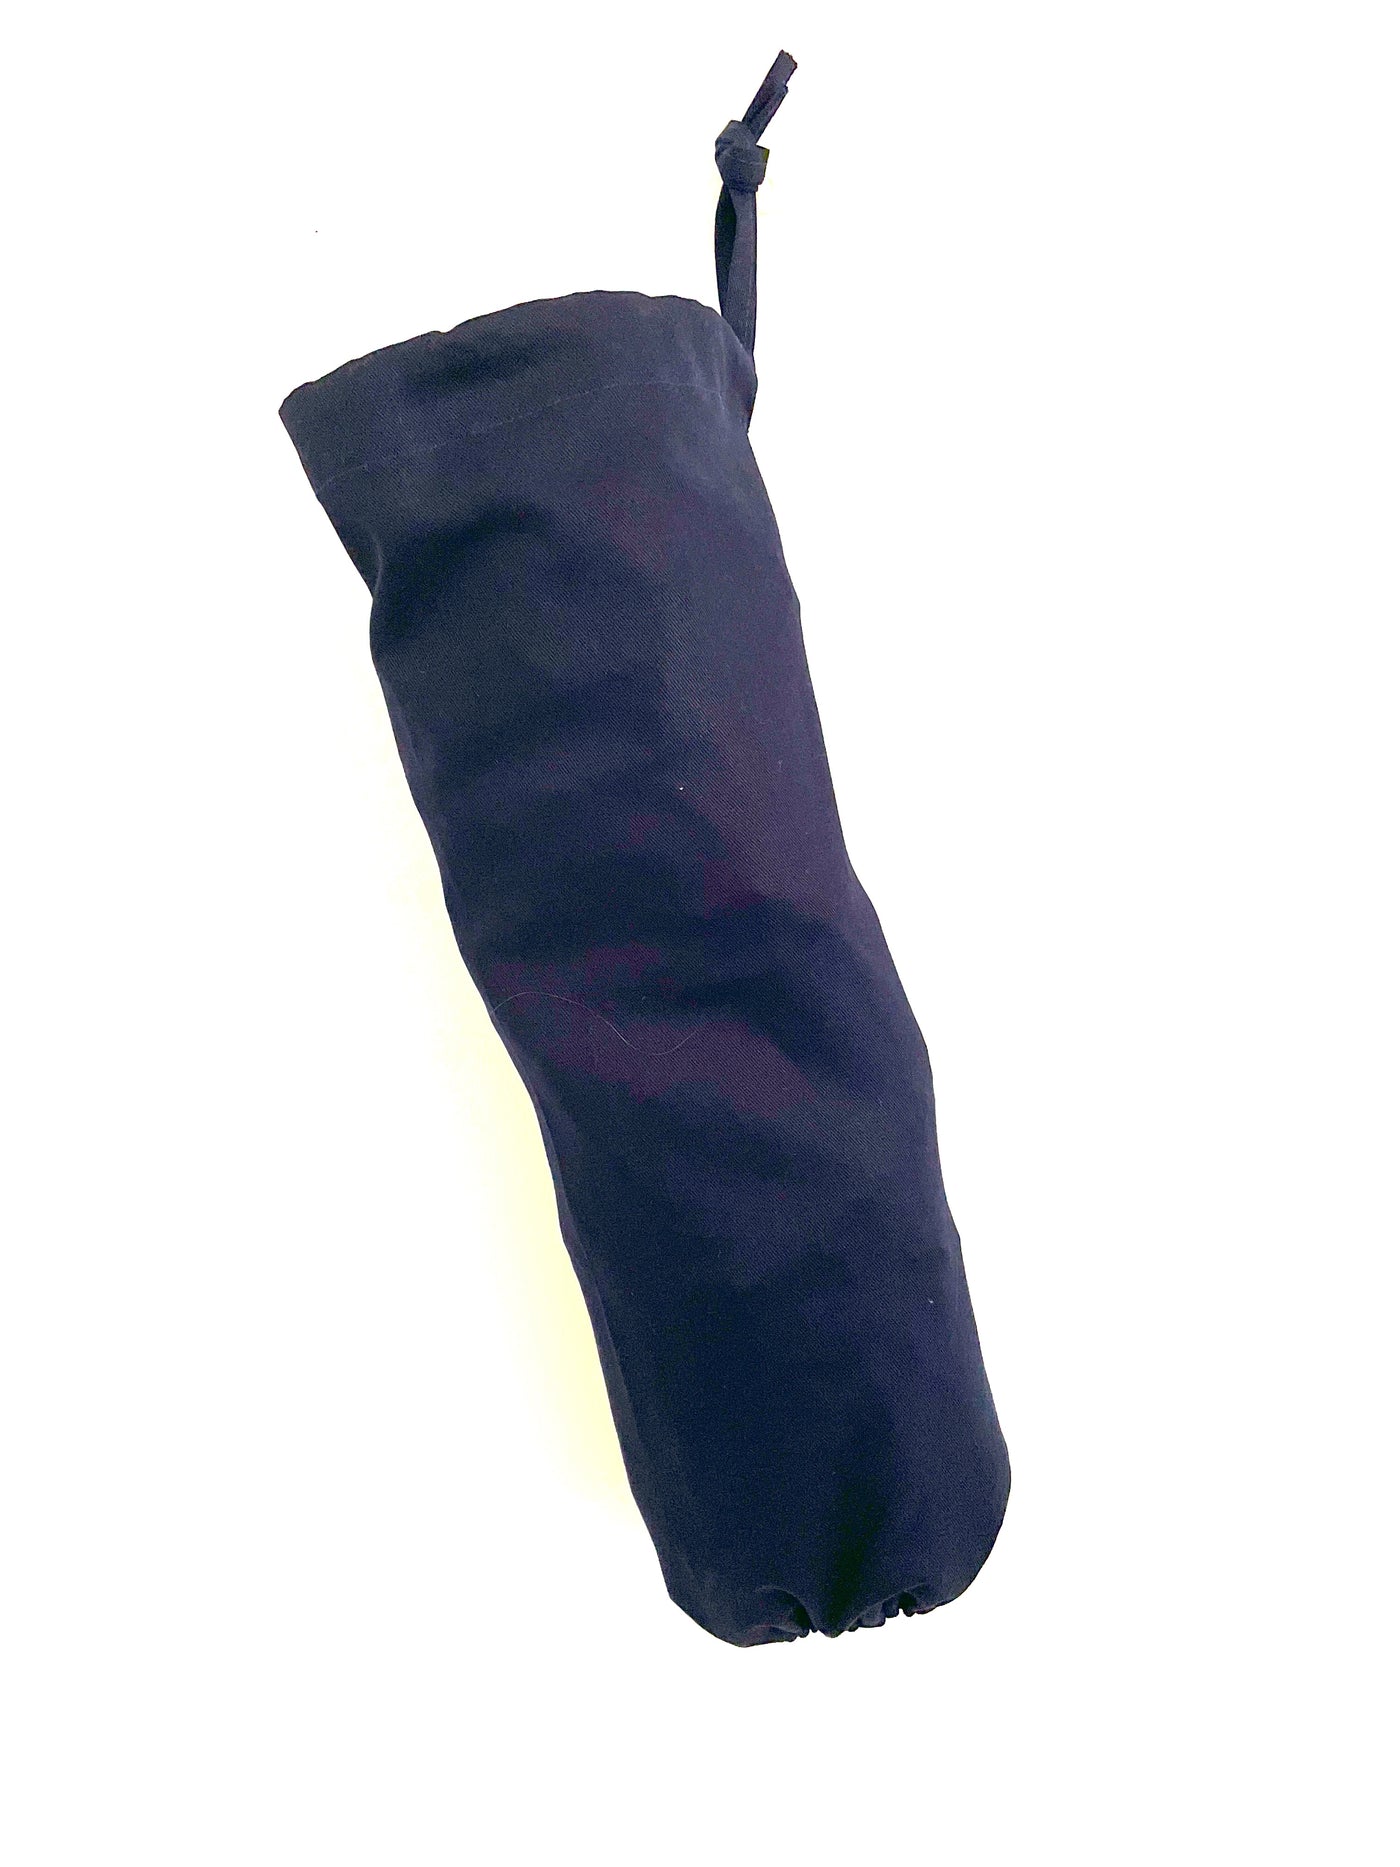 plastic bag dispenser and holder for those pesky bags for life that take over this one is a navy blue drill fabric